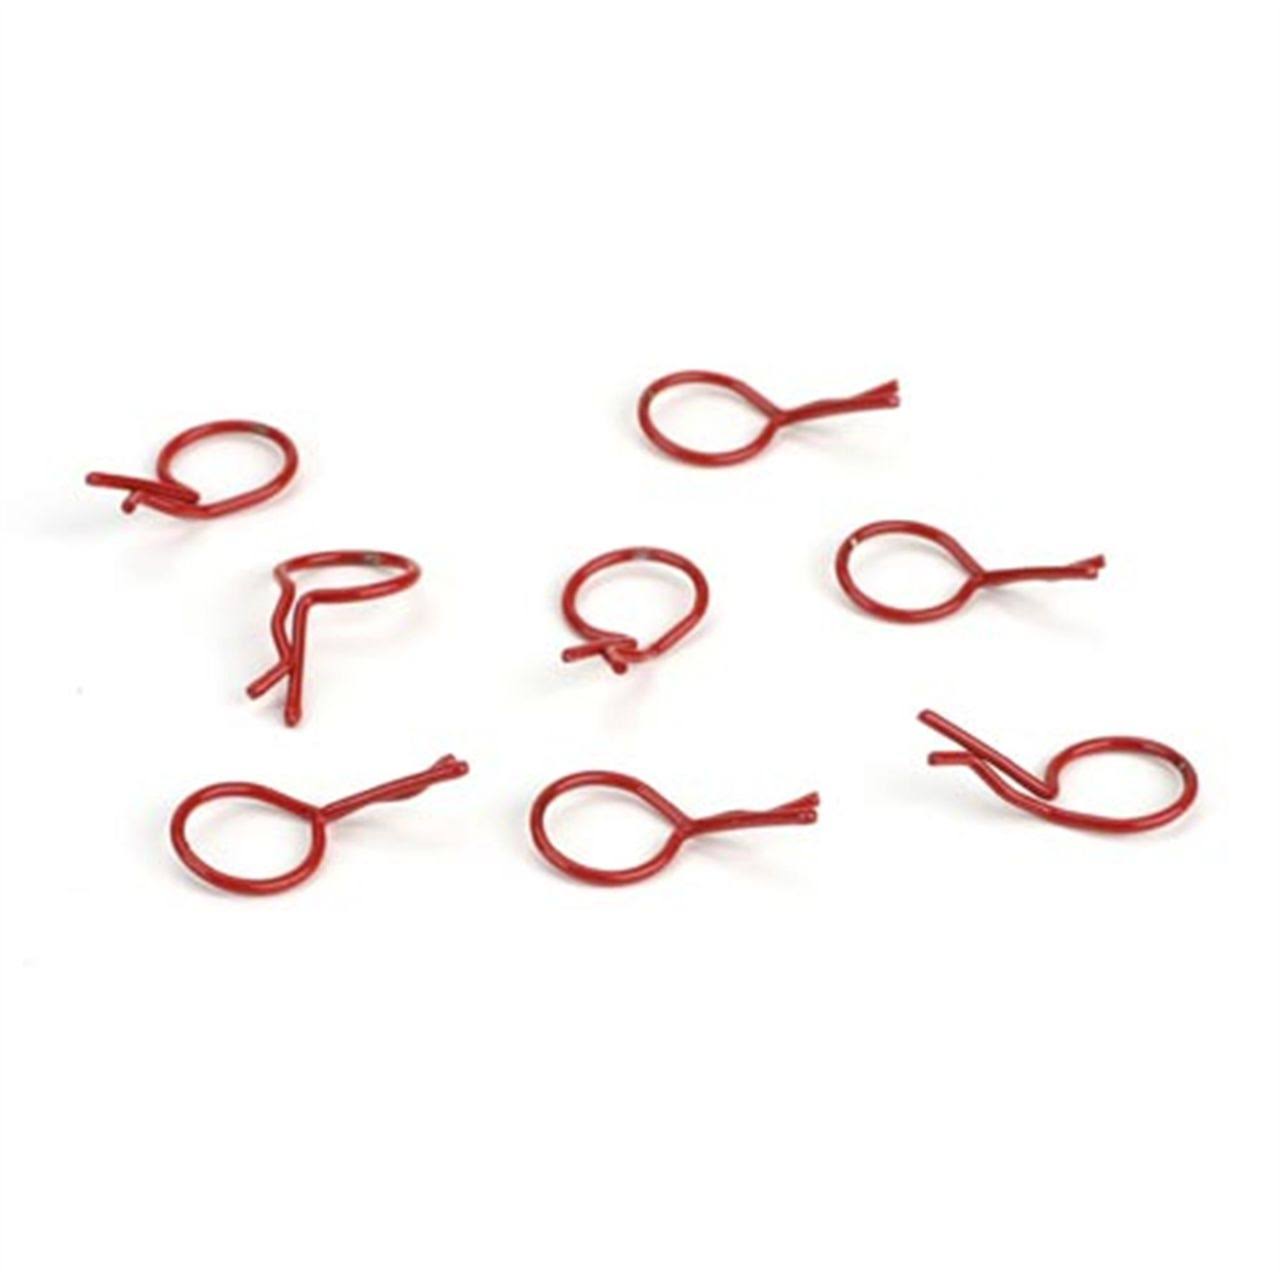 Dynamite Bent Body Clips - Red, 8pcs